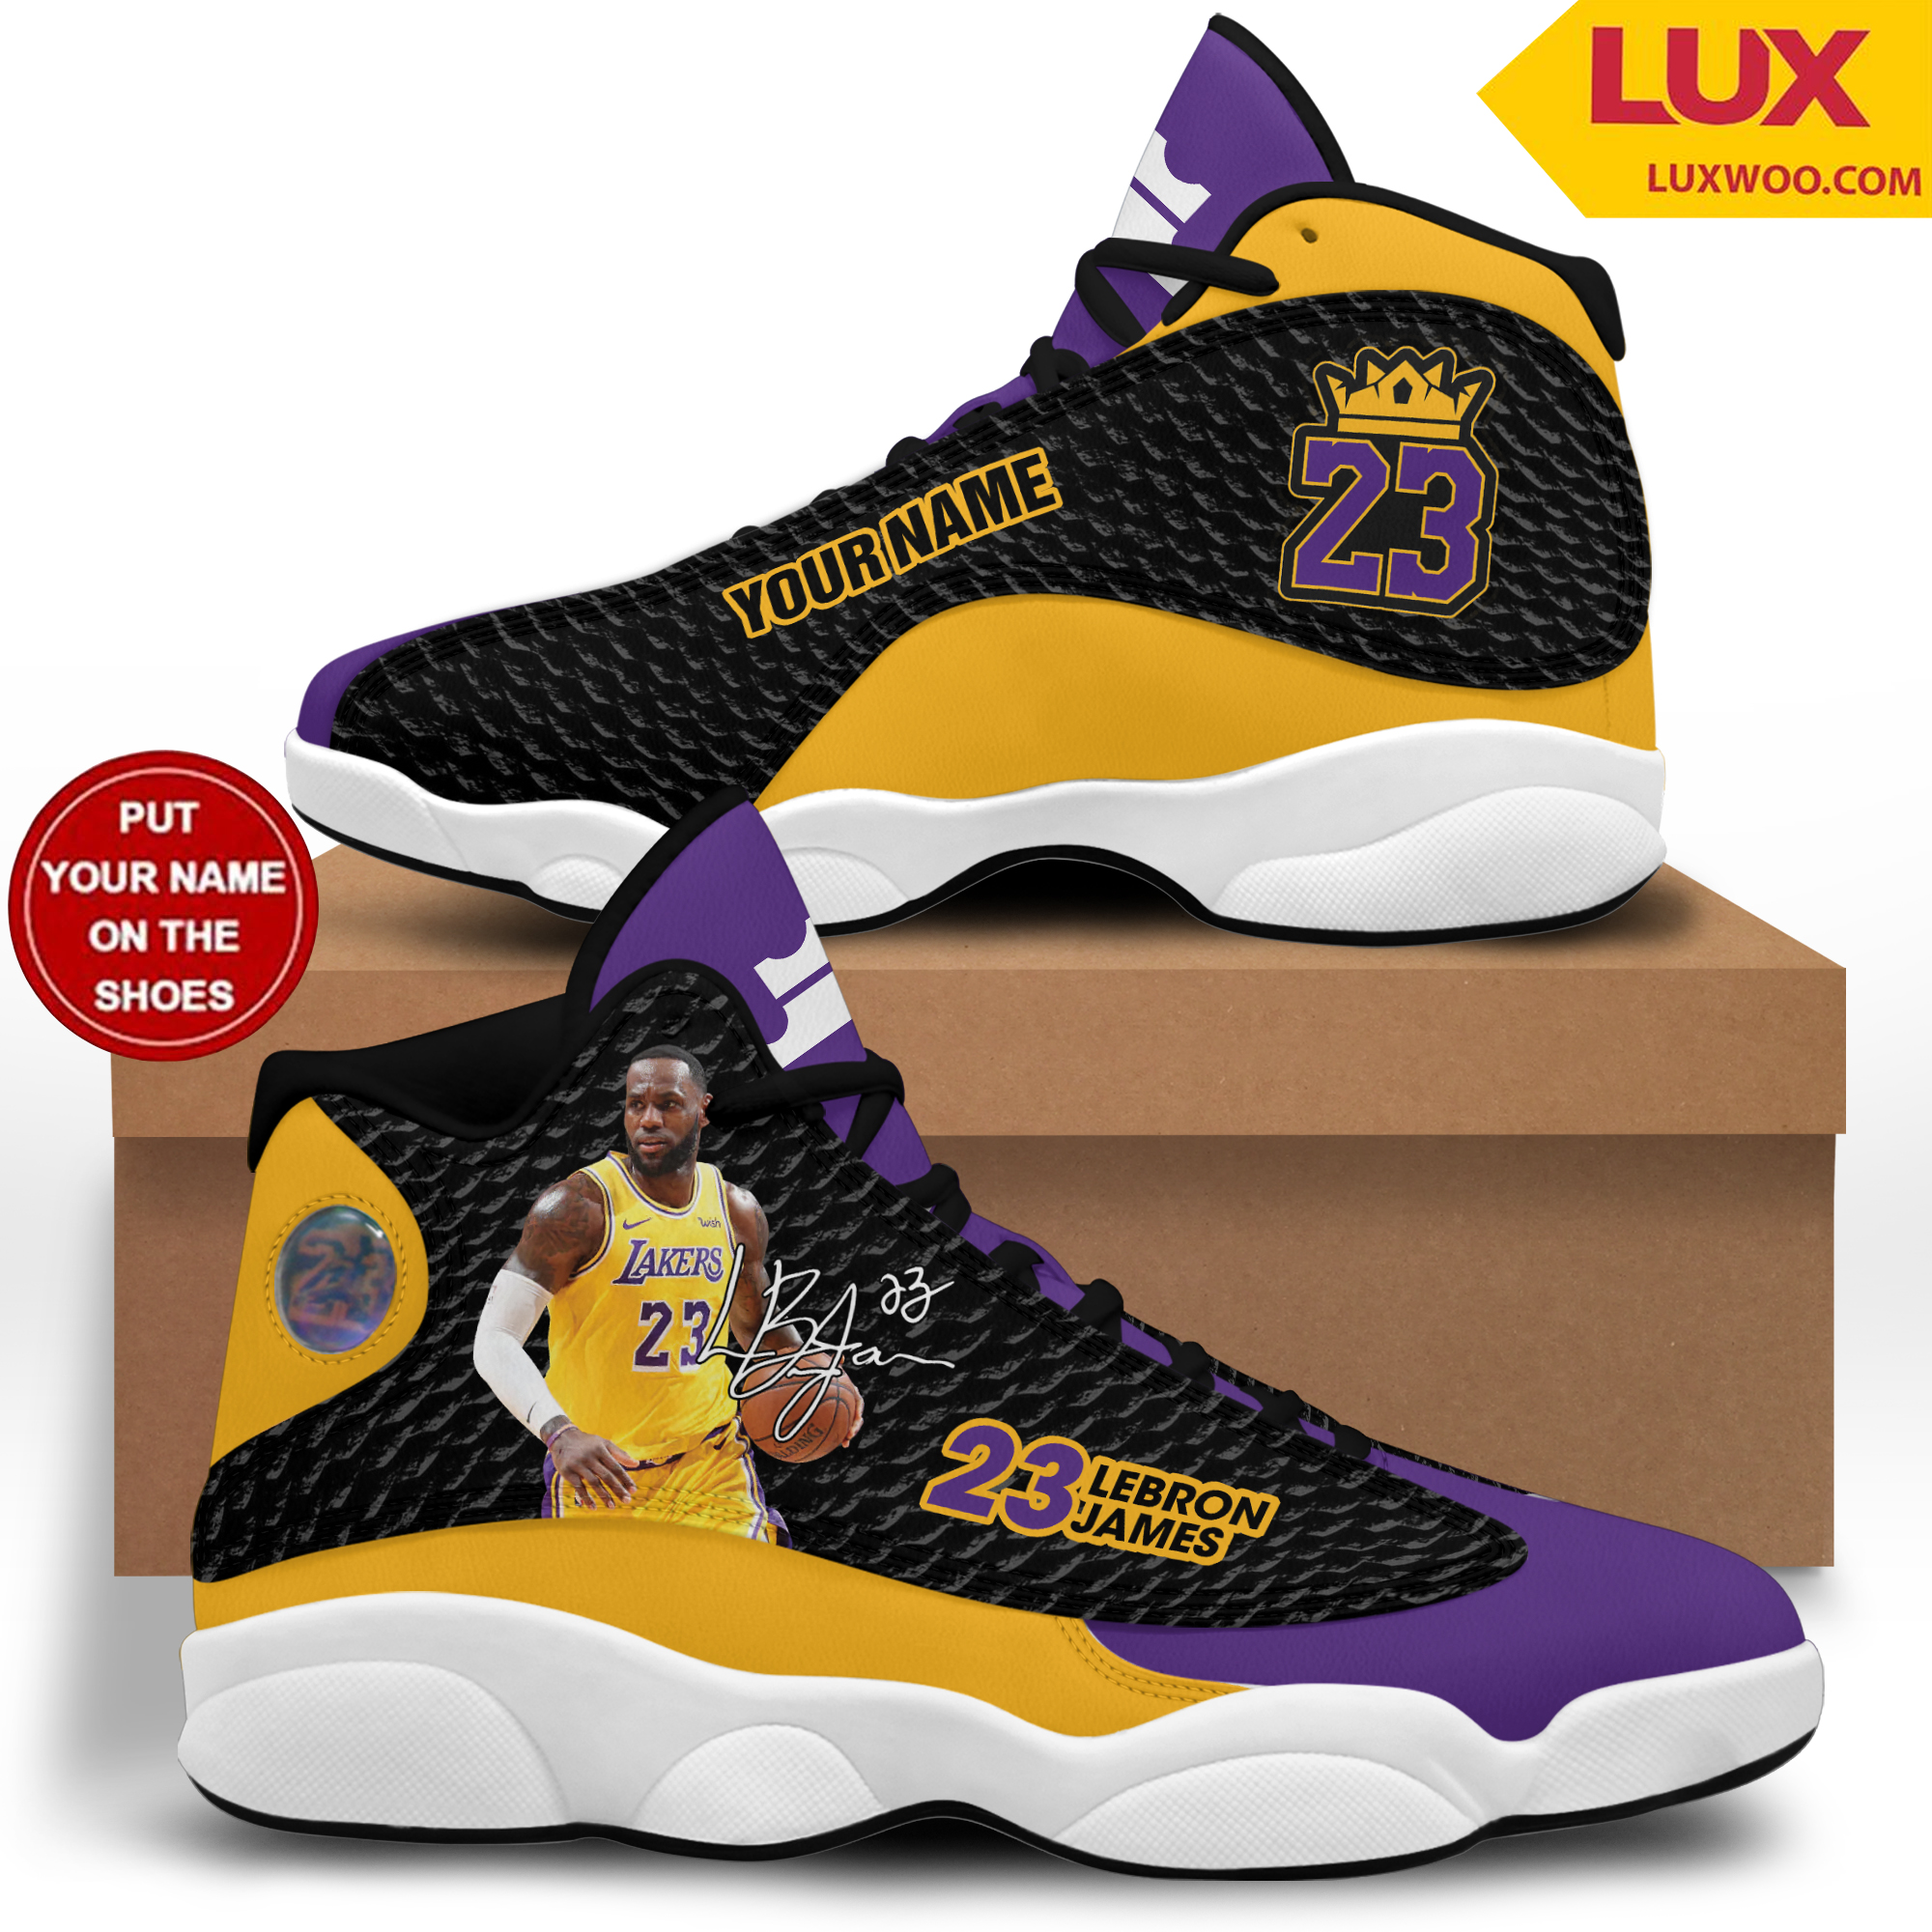 Lebron James Los Angeles Lakers Nba Air Jd13 Shoes Personalized Shoes Lakers Vegan Leather Shoes Custom Shoes Athletic Run Casual Shoes